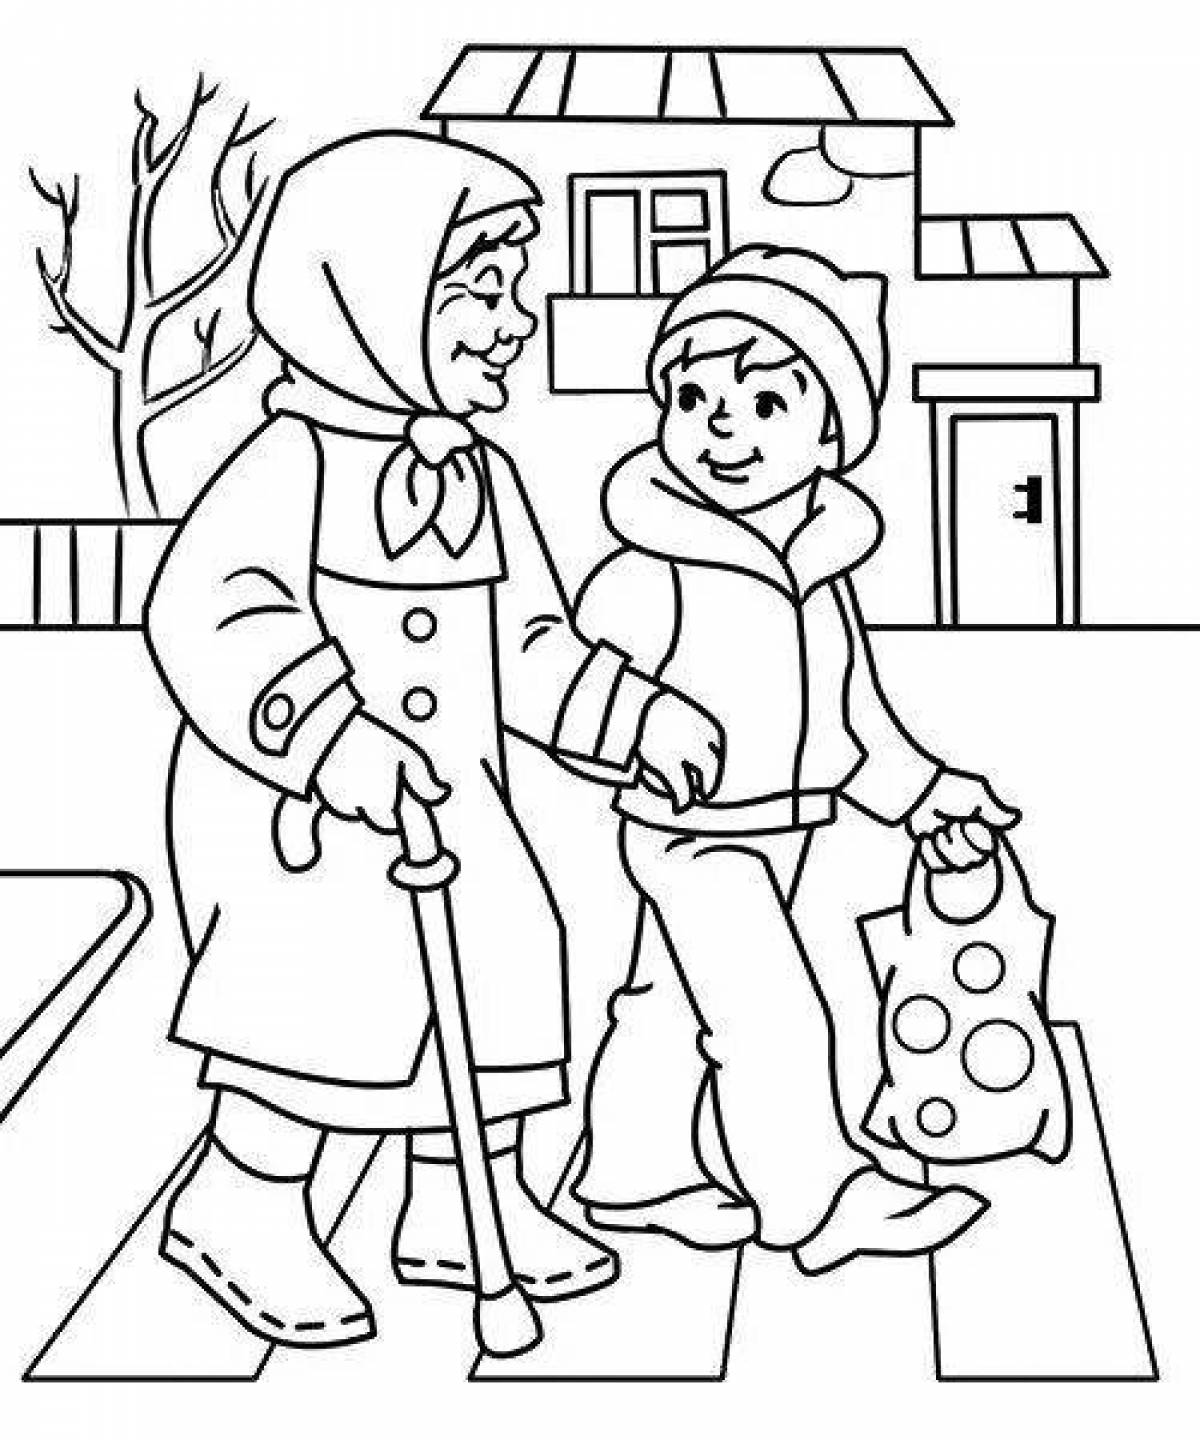 Coloring page brave good deeds